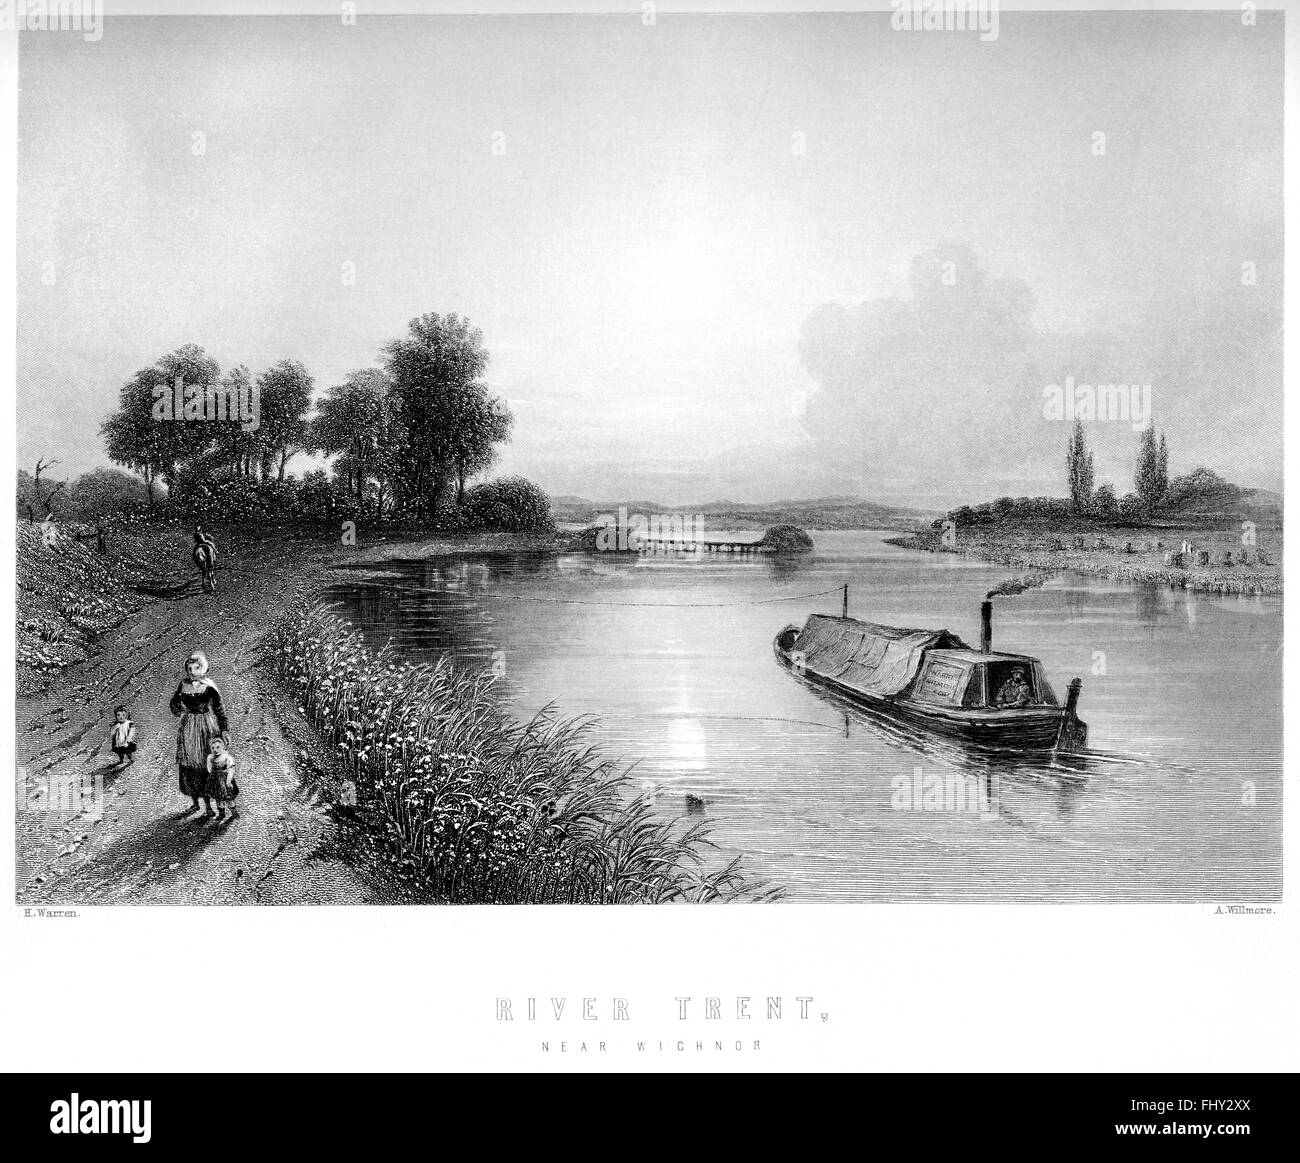 An engraving of the River Trent near Wichnor (now Wychnor) scanned at high resolution from a book printed in 1880. Believed copyright free. Stock Photo